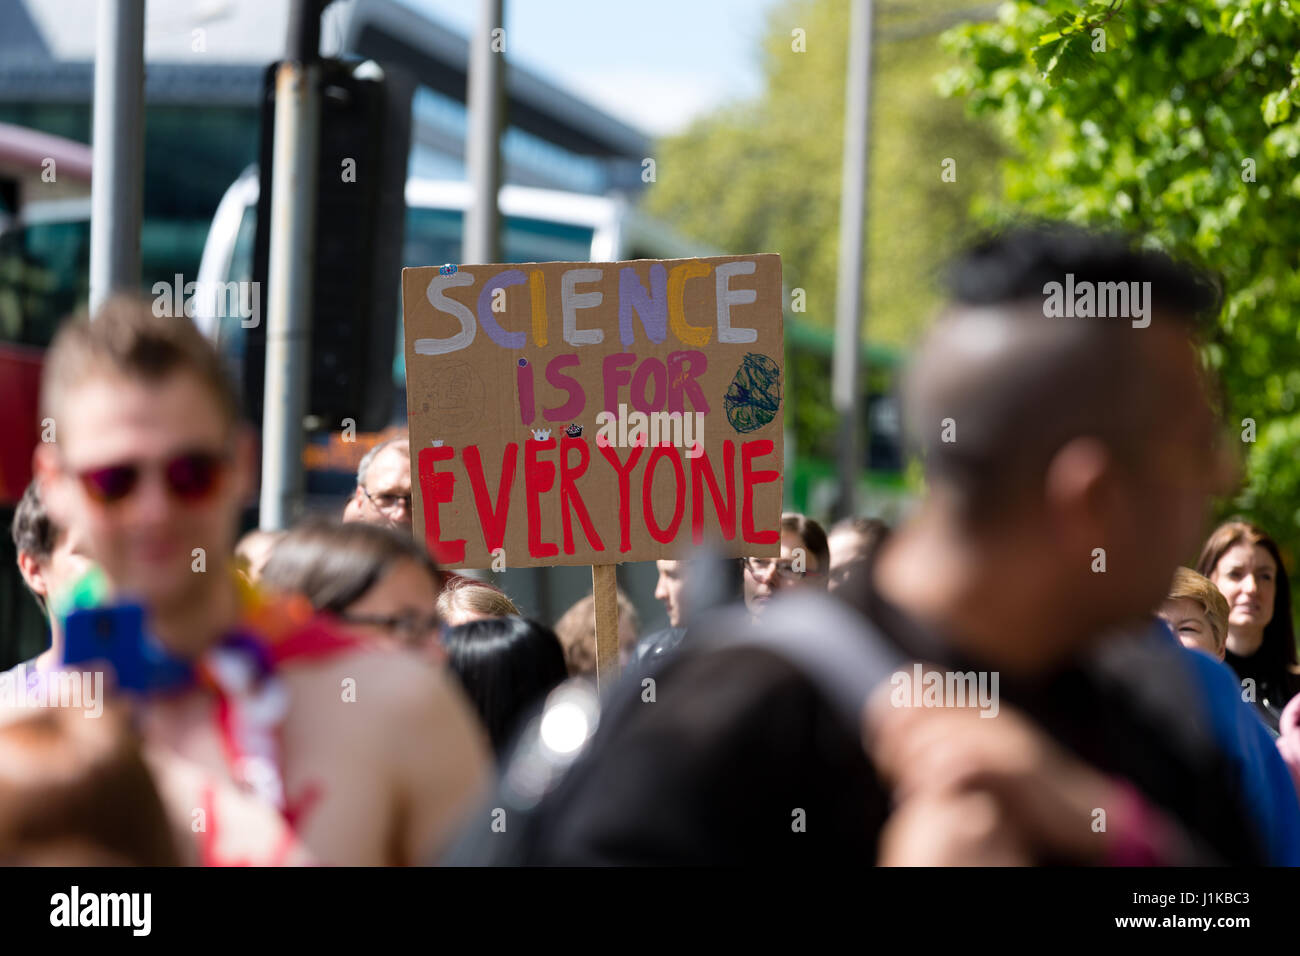 Bristol, UK. 22nd Apr, 2017. Banner in the crowd on the March for Science 'Science is for everyone' Credit: Rob Hawkins/Alamy Live News Stock Photo